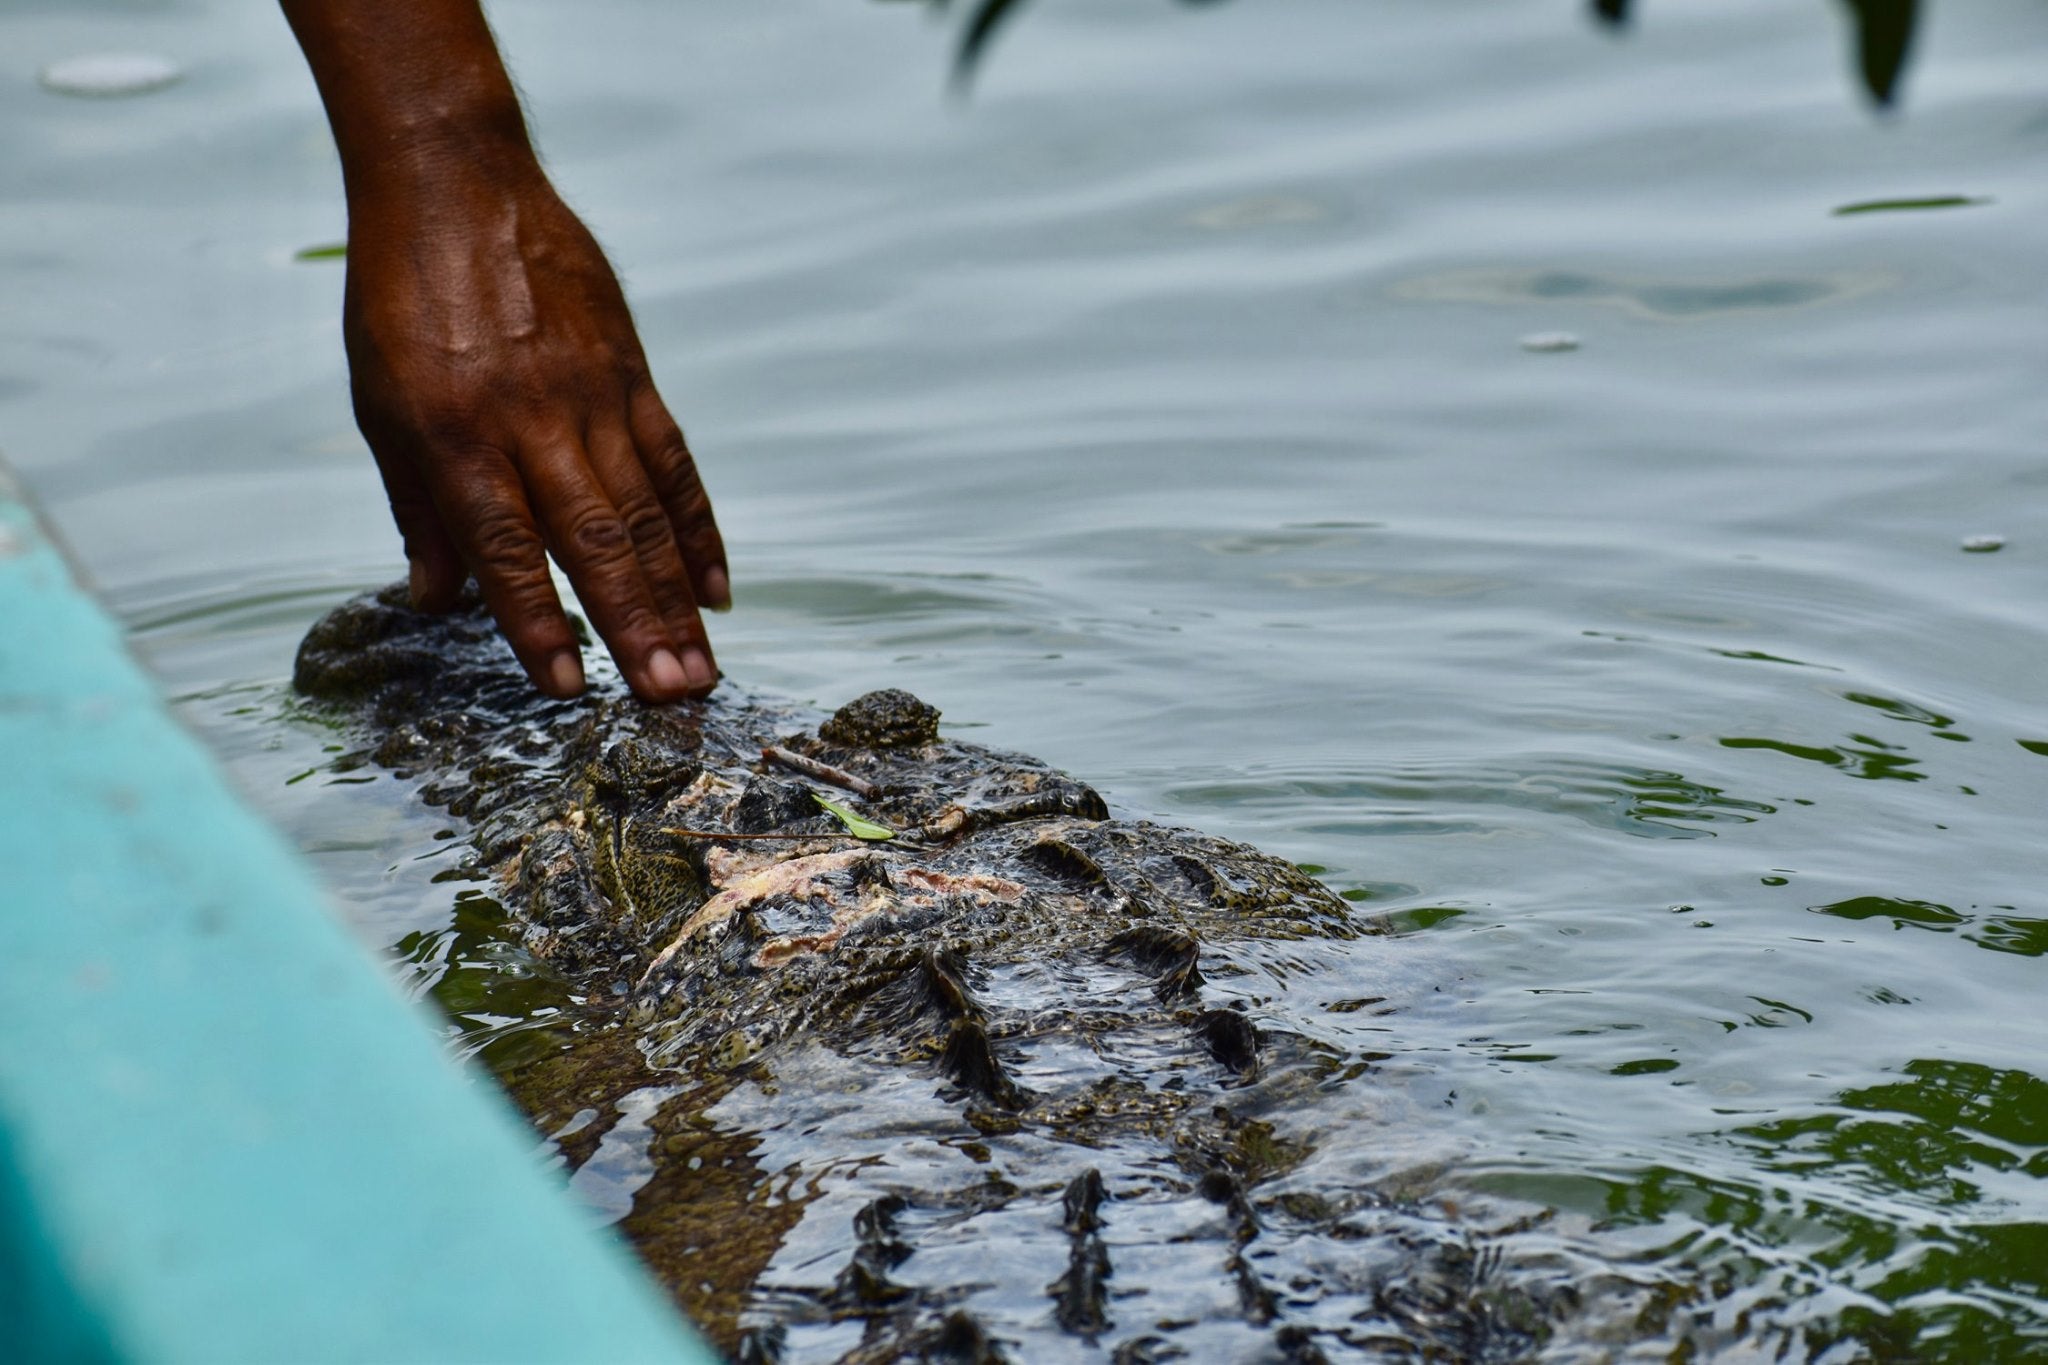 A hand reaches out to touch a swimming crocodile.